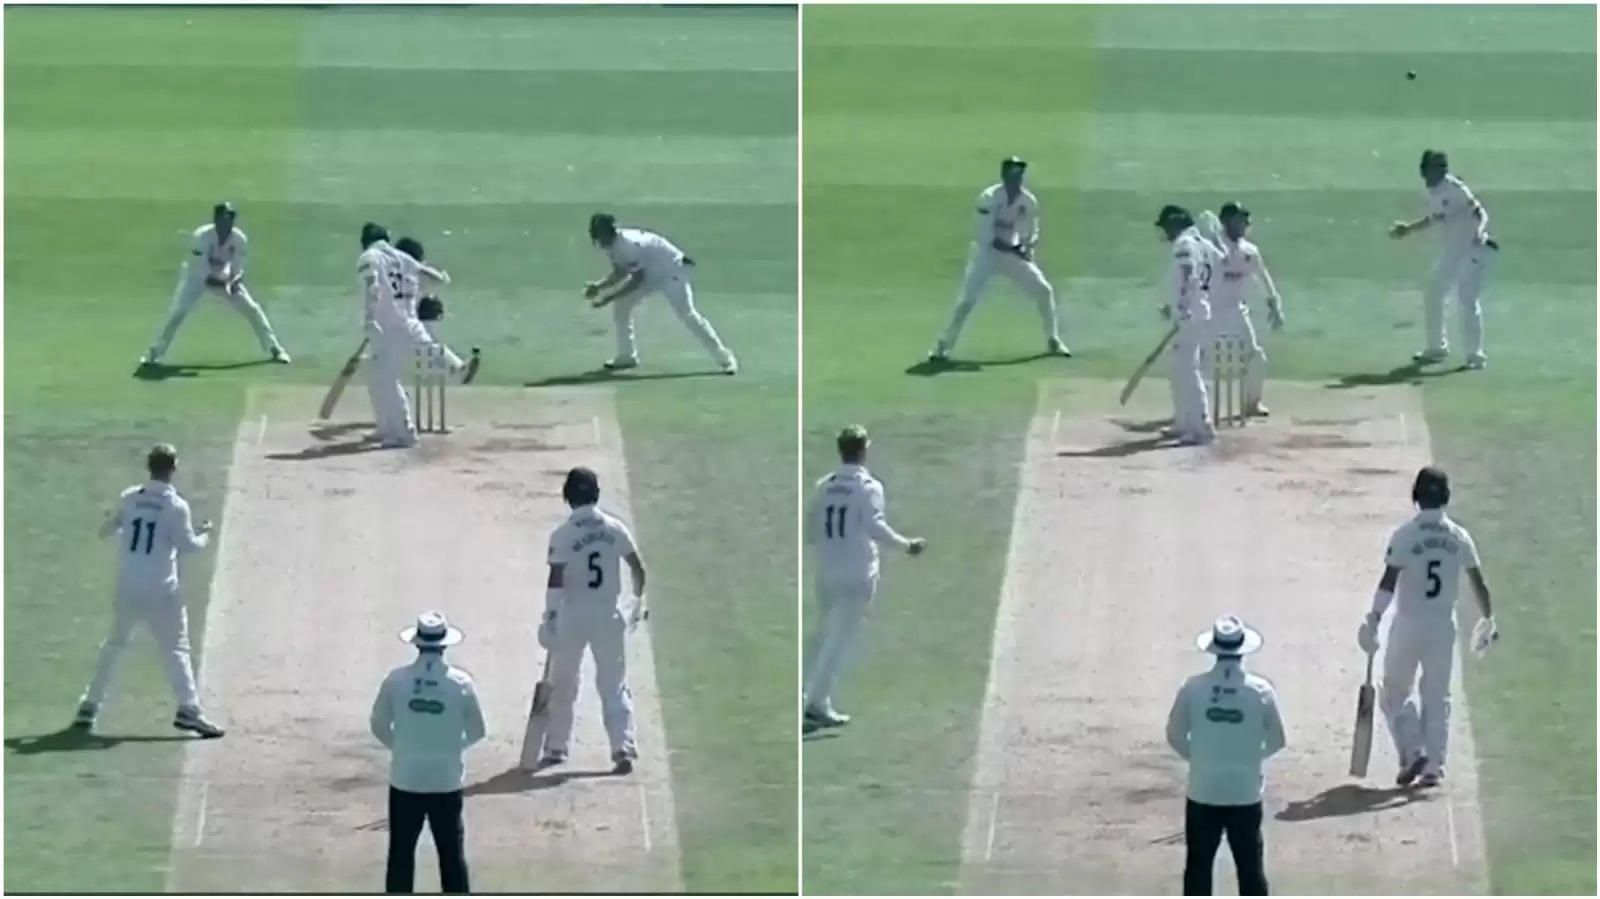 WATCH: Outrageos footy skills in action by wicket-keeper in tag team catch